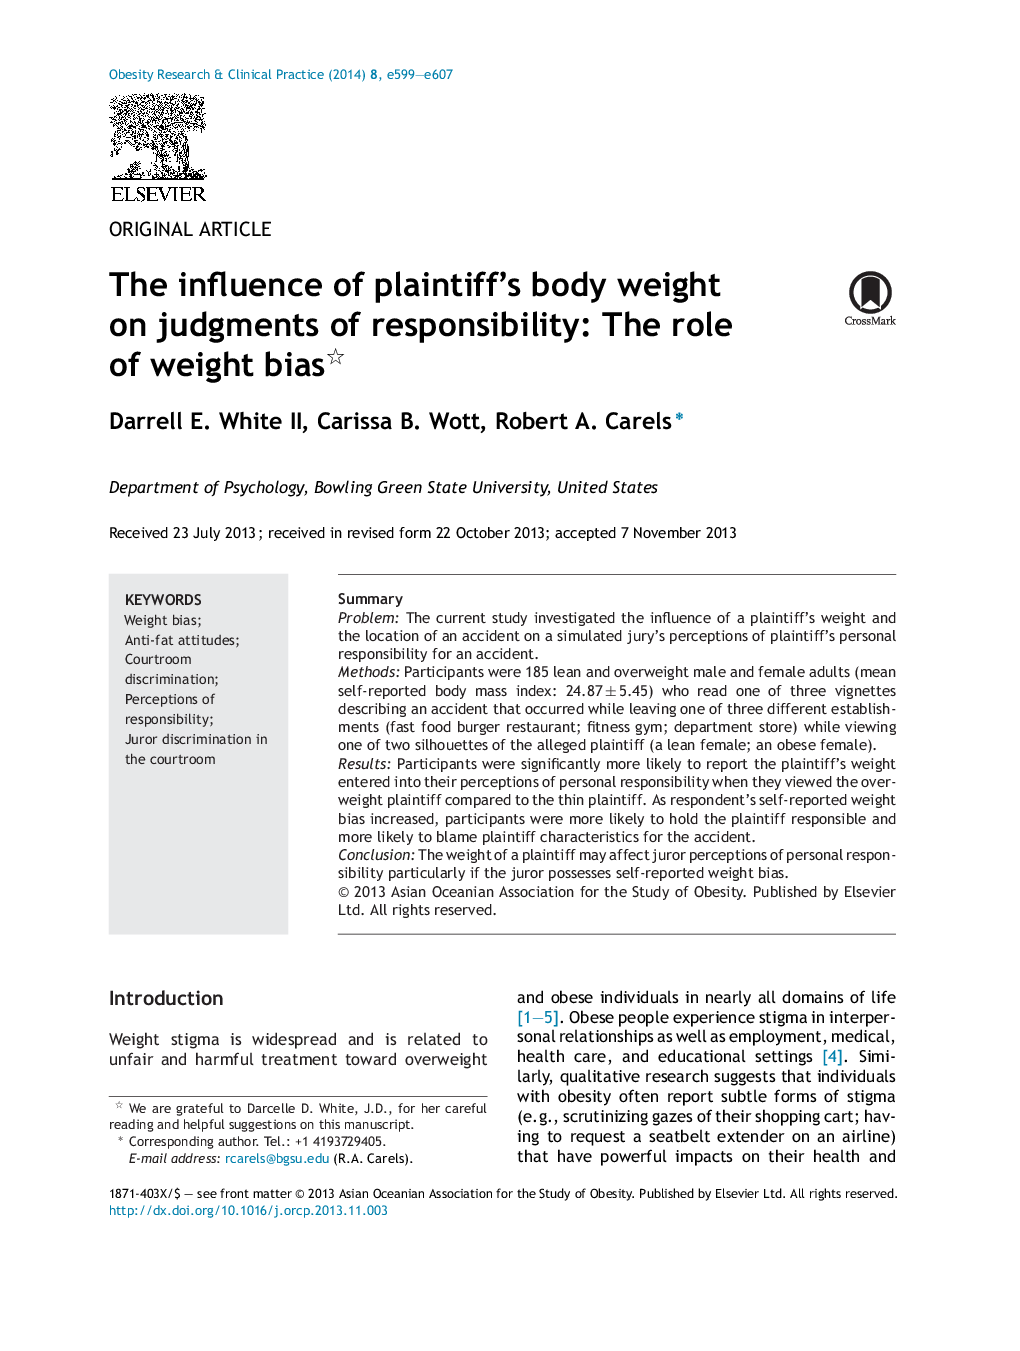 The influence of plaintiff's body weight on judgments of responsibility: The role of weight bias 